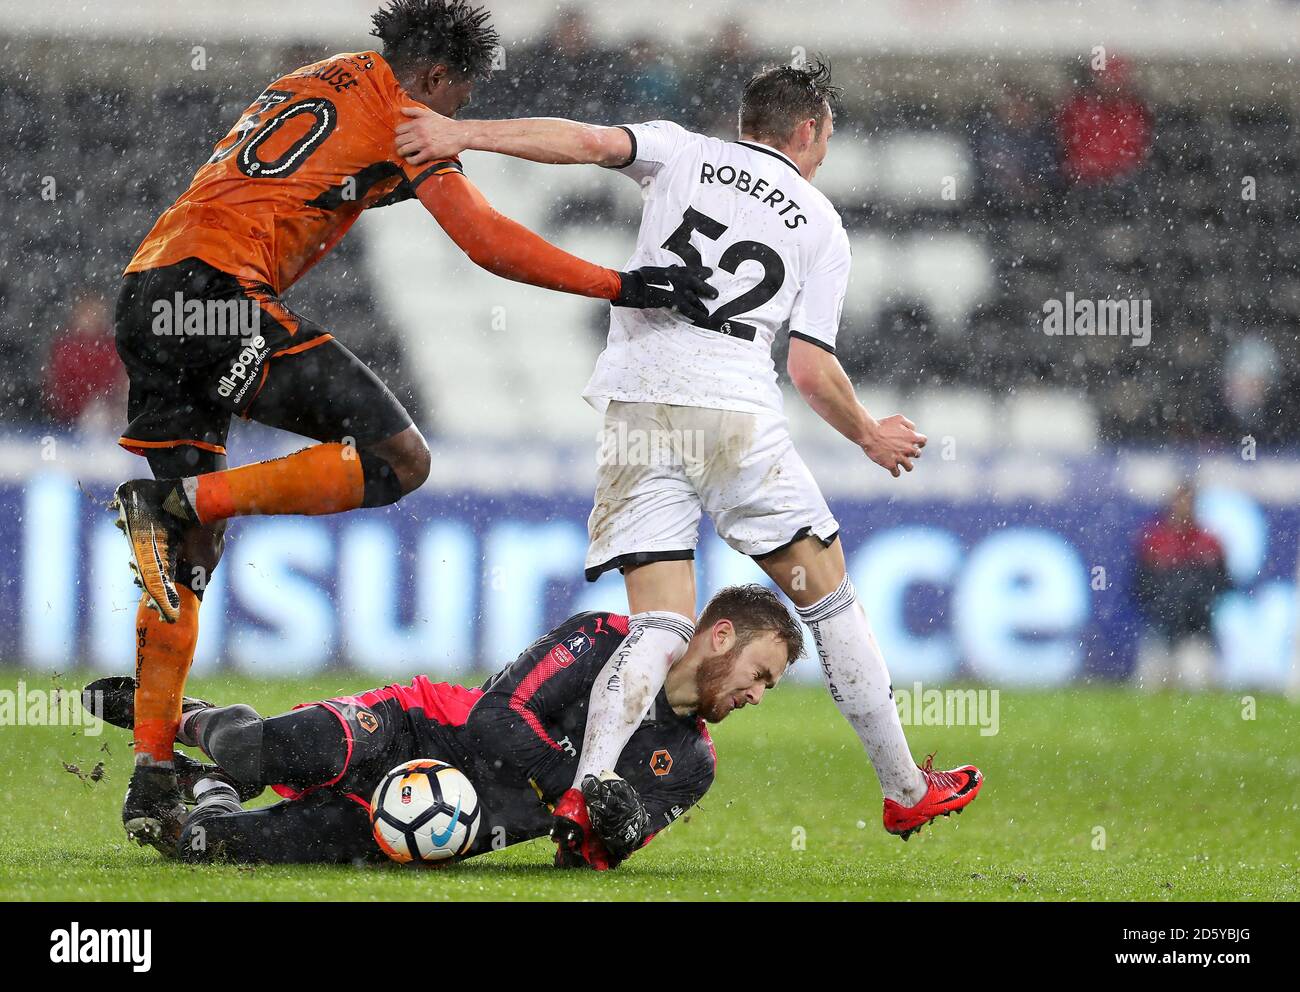 Wolverhampton Wanderers' Kortney Hause (left) battles for the ball with Swansea City's Connor Roberts and Goalkeeper Kristoffer Nordfeldt (centre) Stock Photo